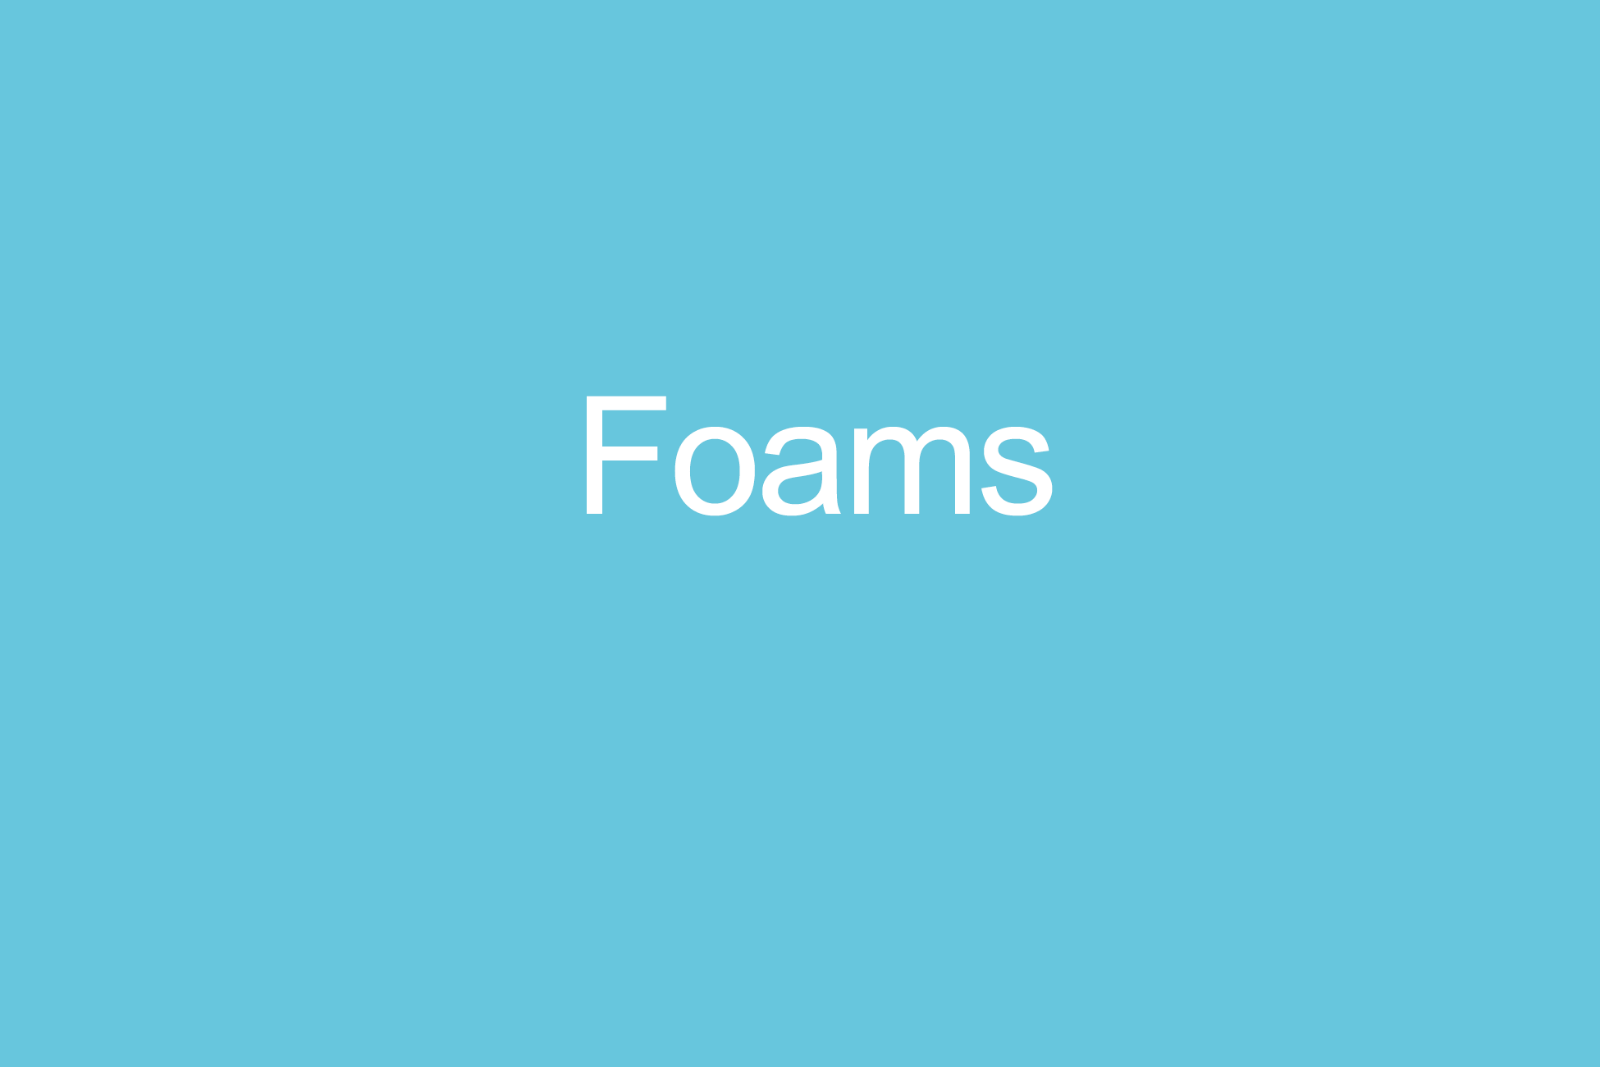 Foams are man-made materials with a cellular structure and low density. 